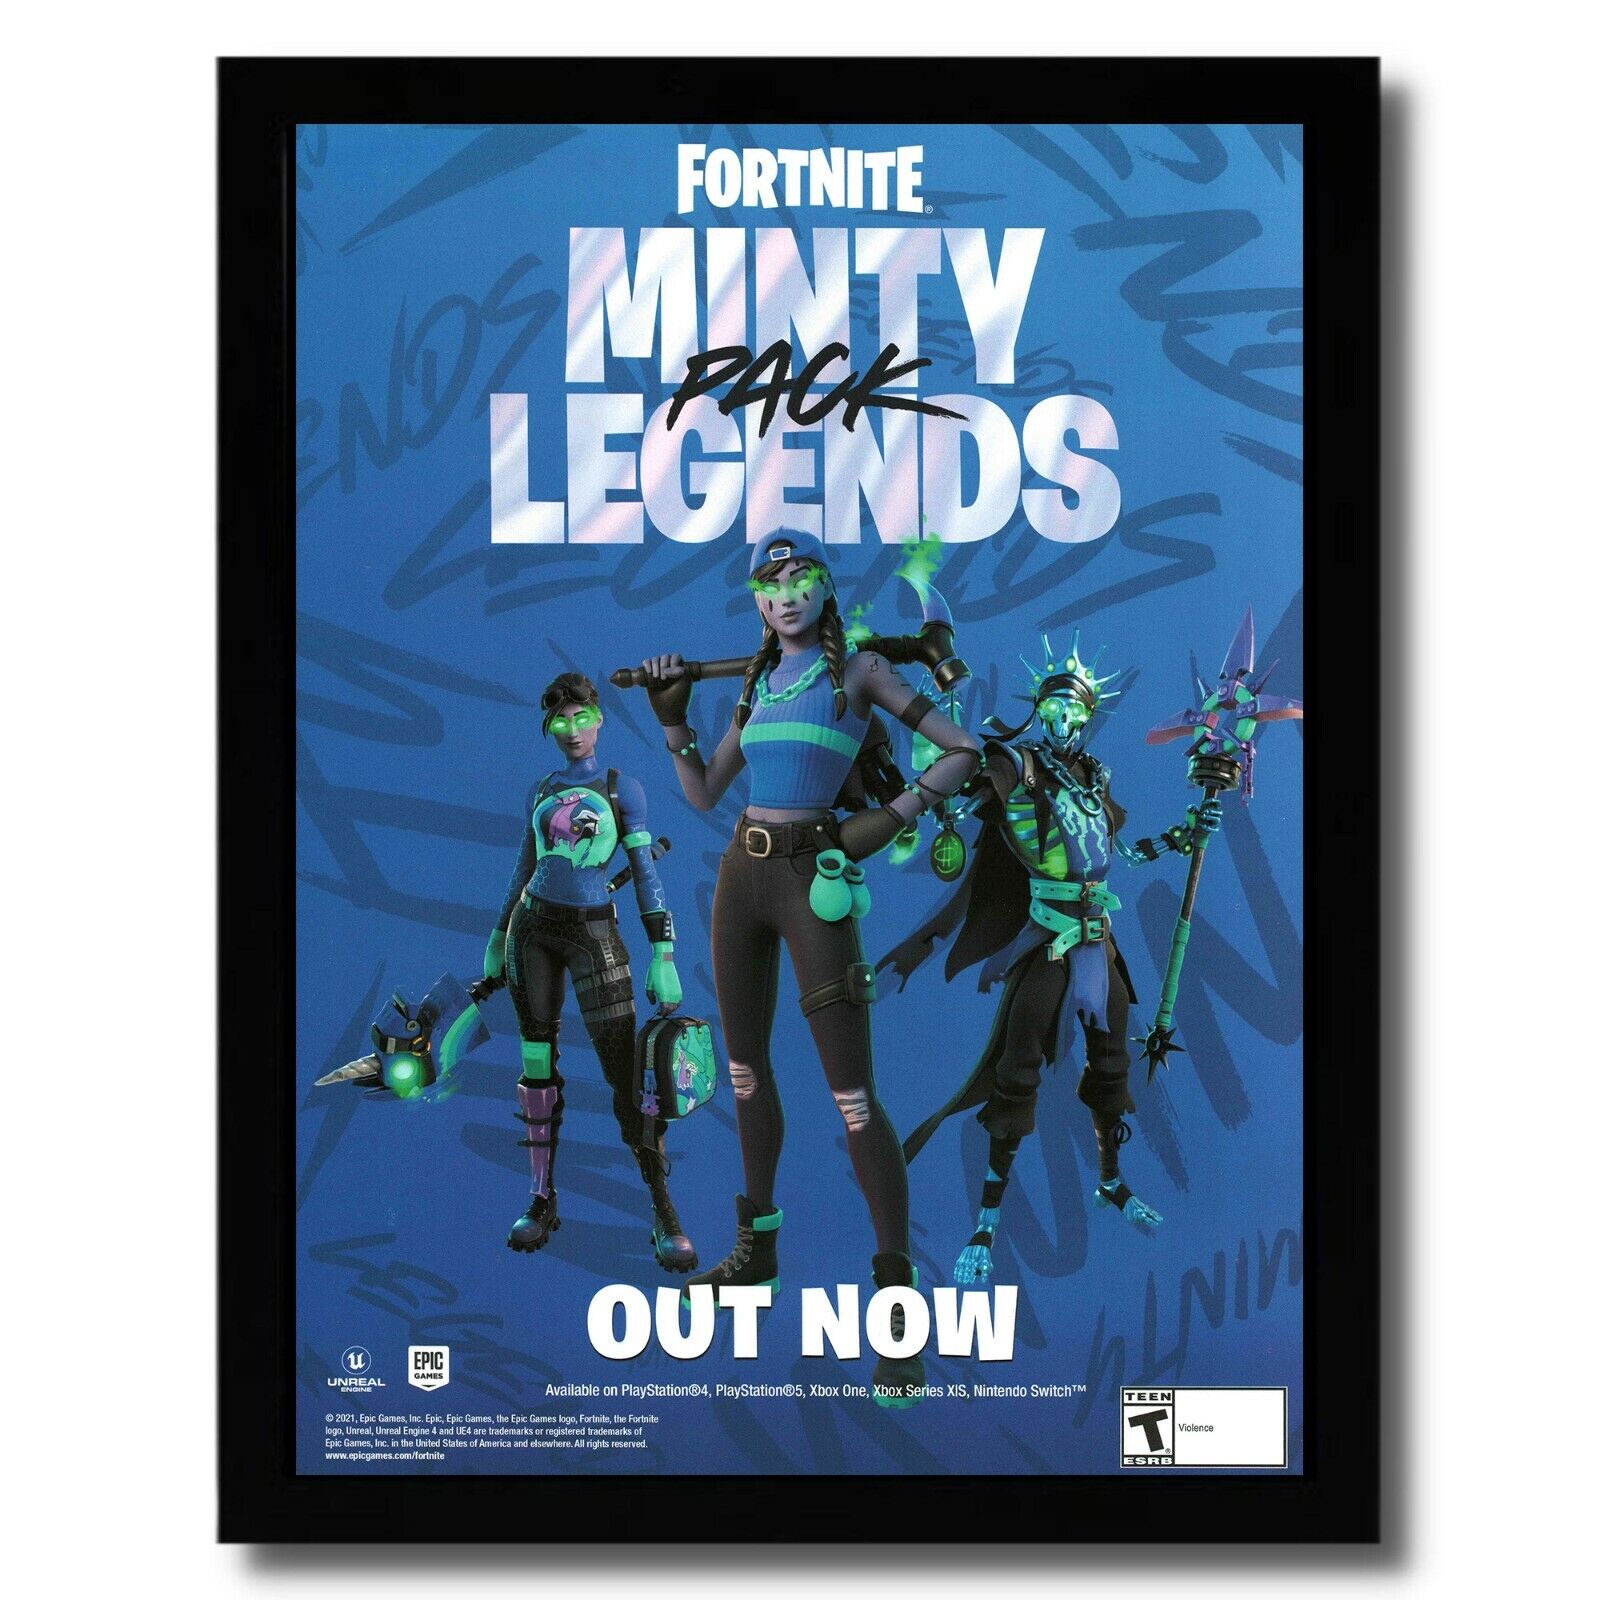 2021 Fortnite Minty Legends Pack Framed Print Ad/Poster PS5 Xbox Switch Game Art